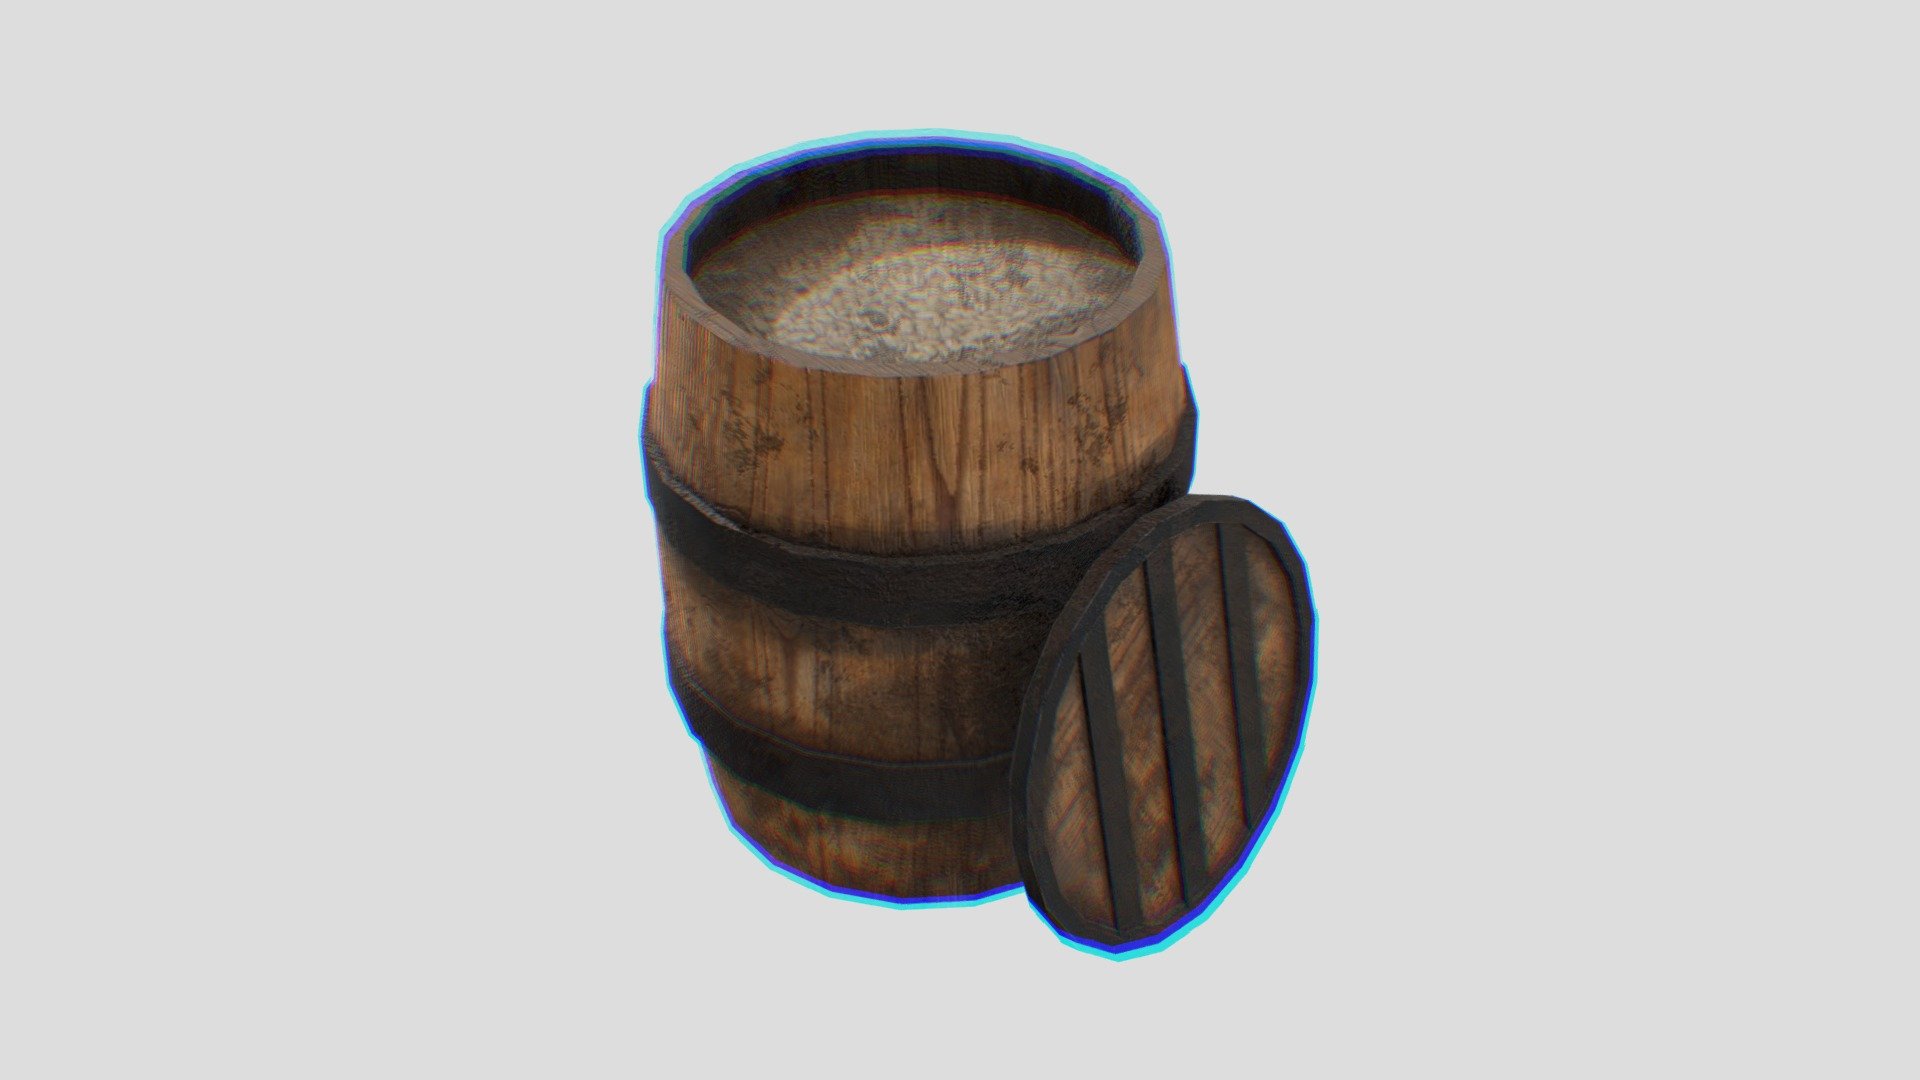 An abandoned barrel of grain, finally opened after being discovered within a ship wreckage along the ocean floor. The wood, intaking extensive amount of water, as well as the metal rusting overtime, the water had seeped into the grain. Now left stranded on a beach as food for the local bird population 3d model